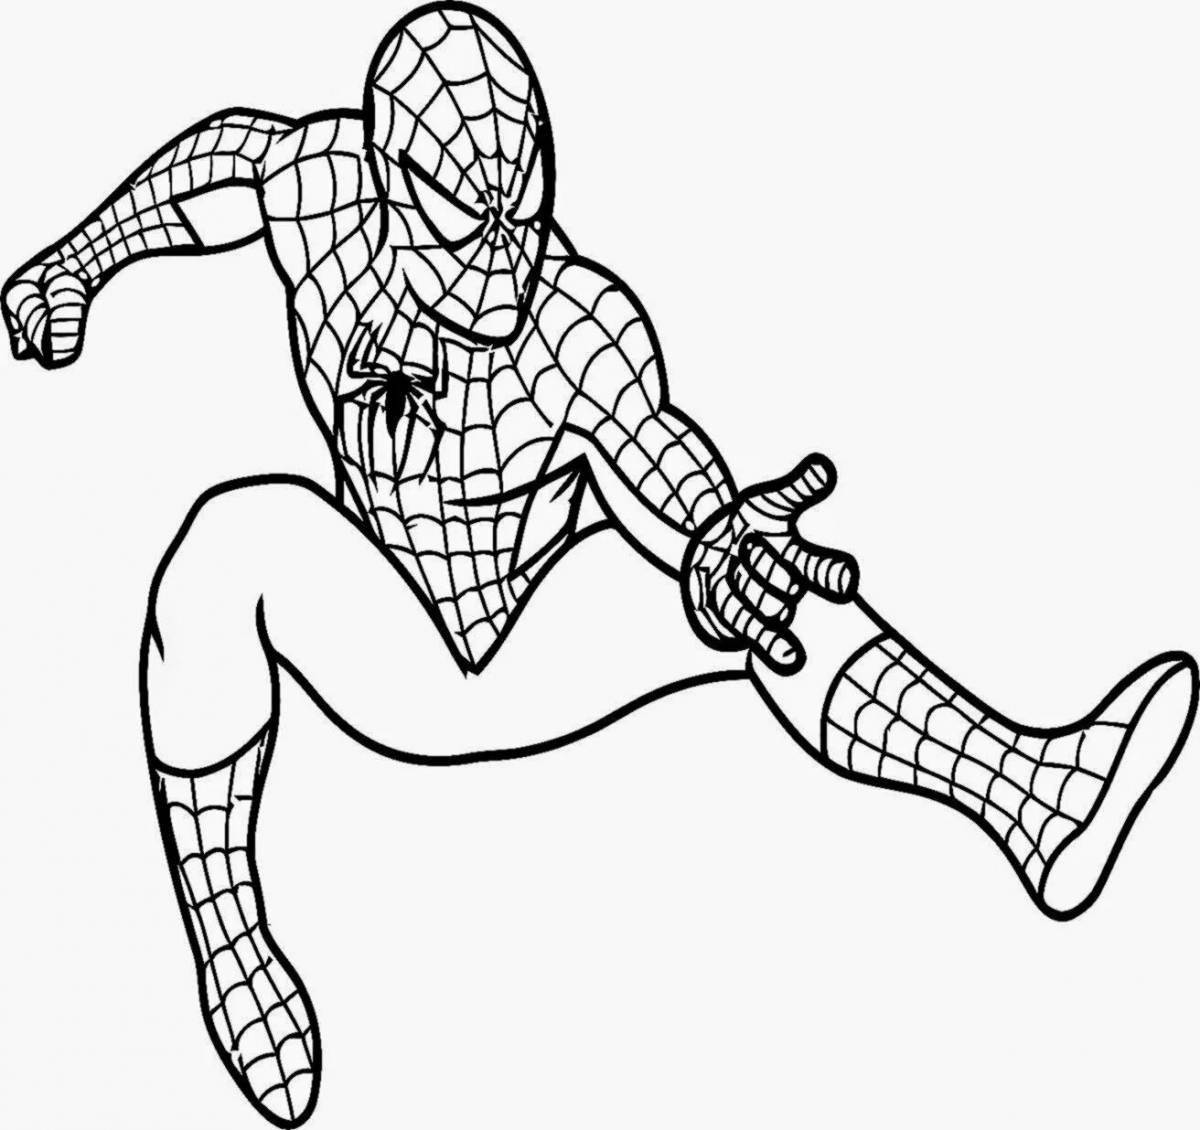 Spider-man cute coloring book